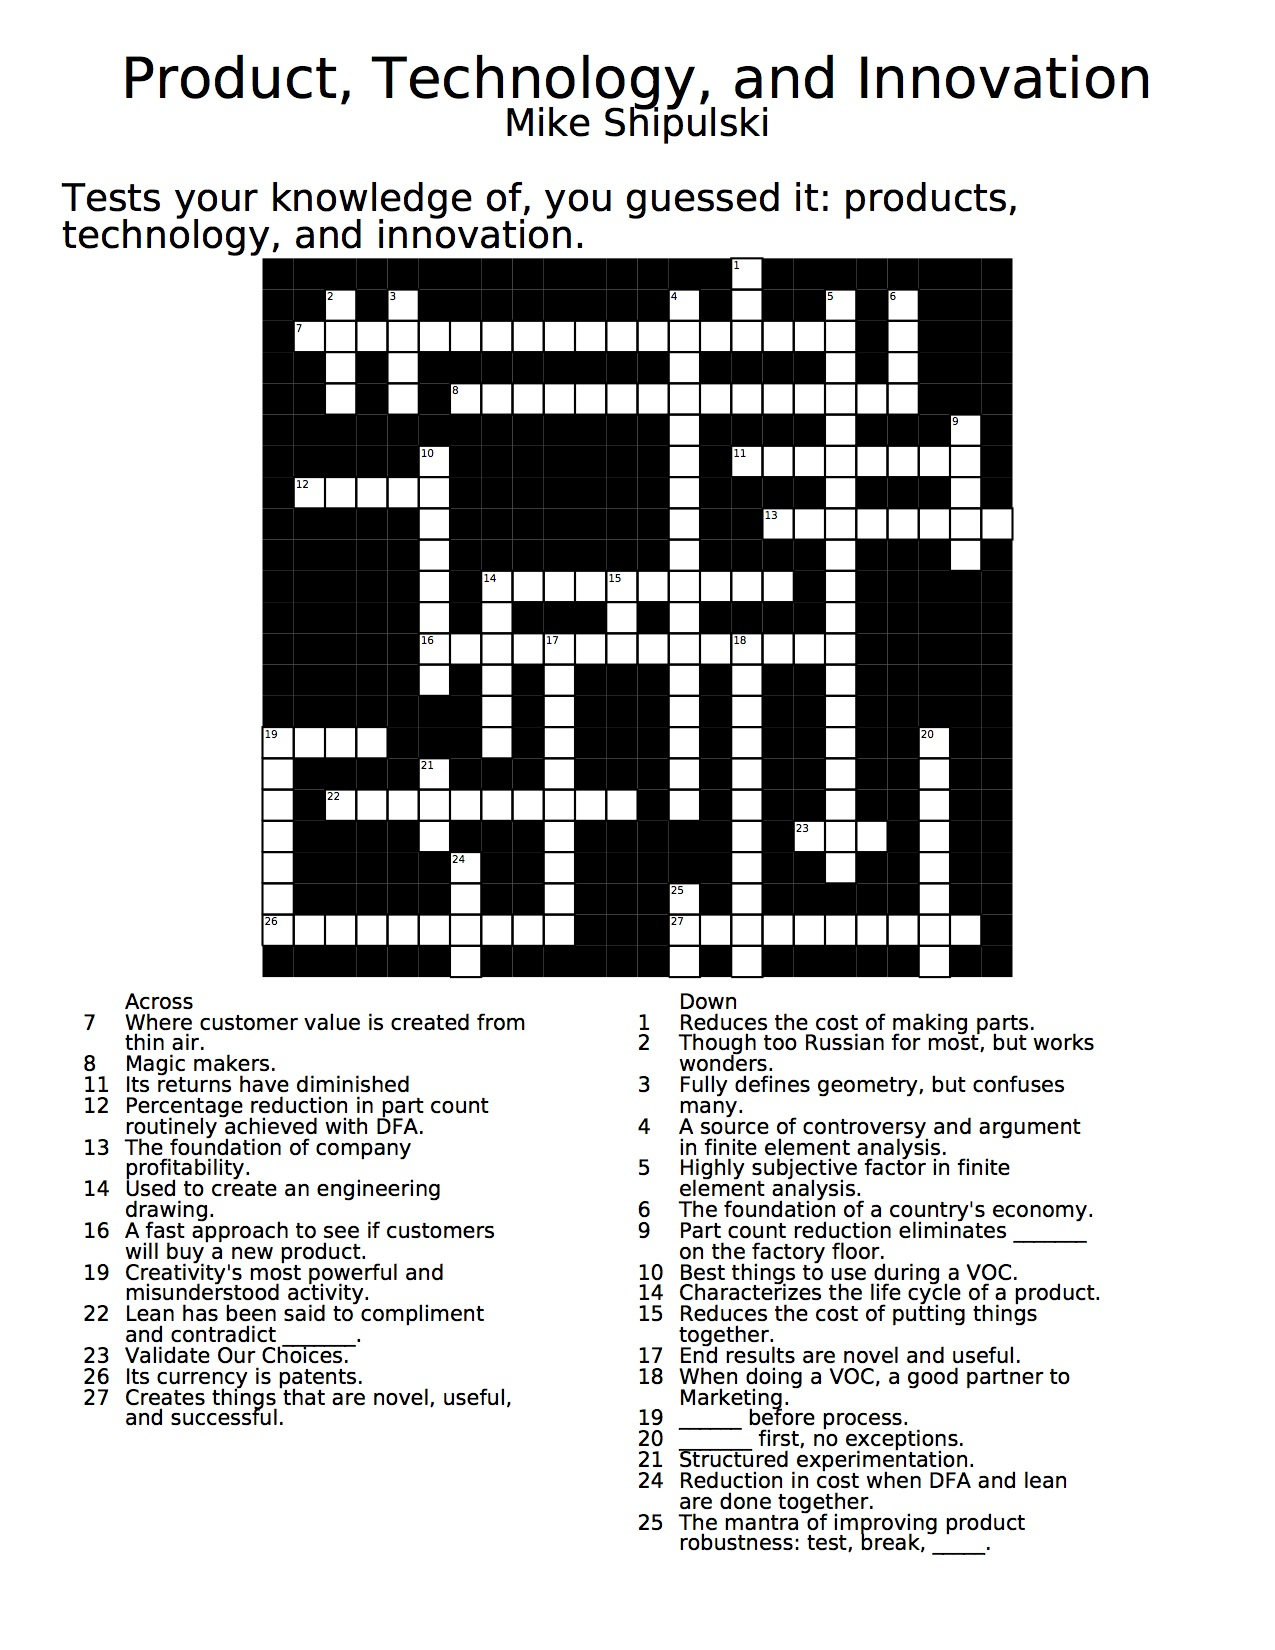 Crossword Puzzle – Product, Technology, Innovation | Shipulski On Design - Printable Crossword Puzzles 2013